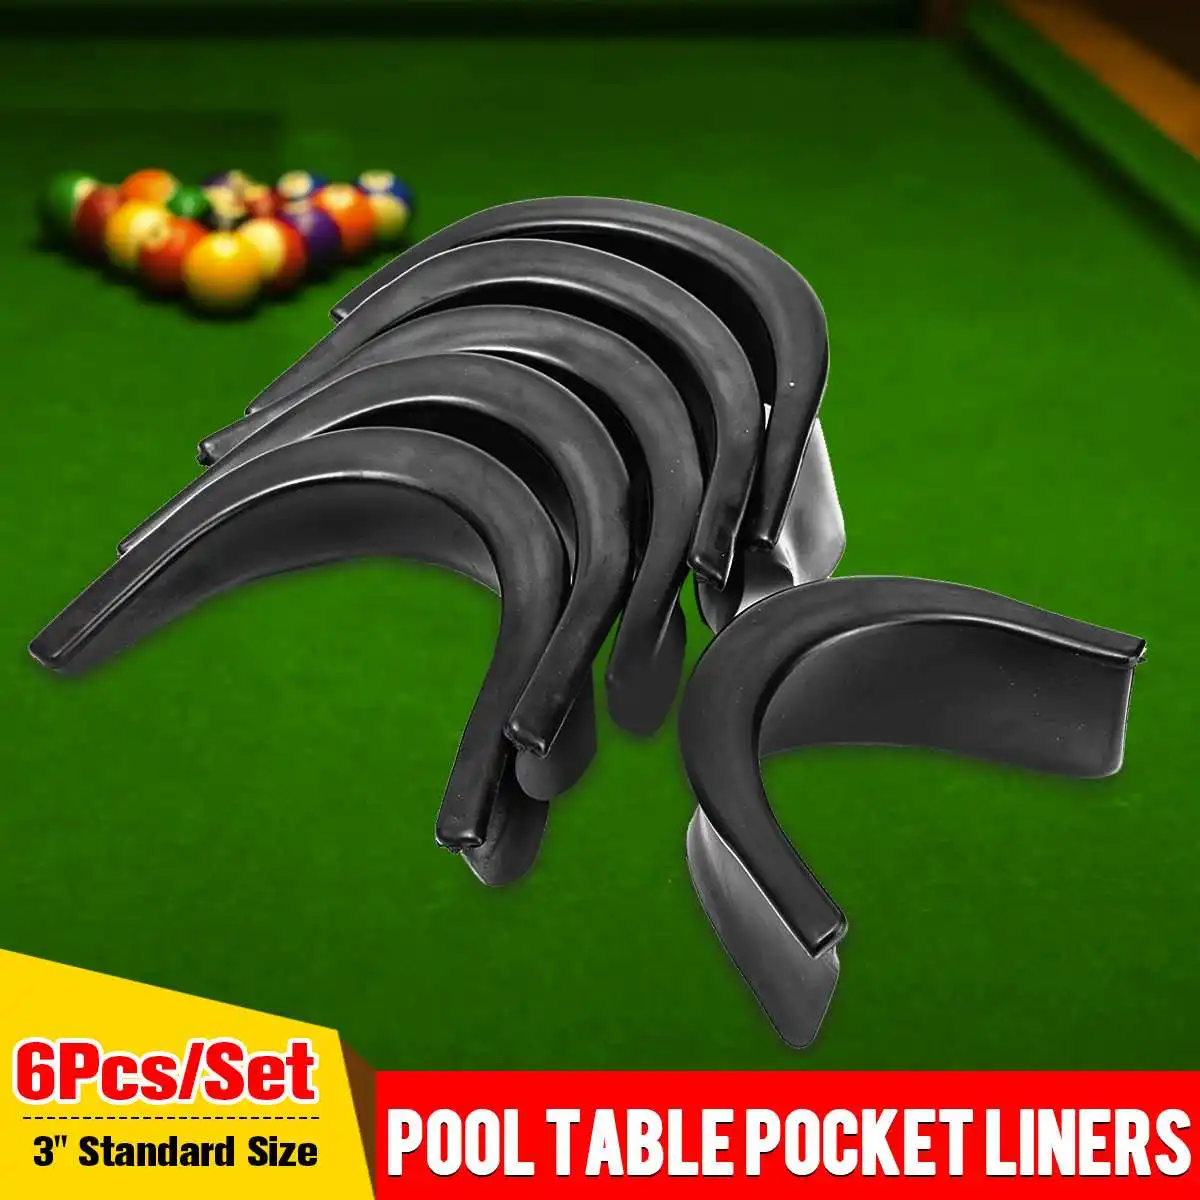 6Pcs Artificial Leather Pool Snooker Billiards Table Pockets Set Accessories